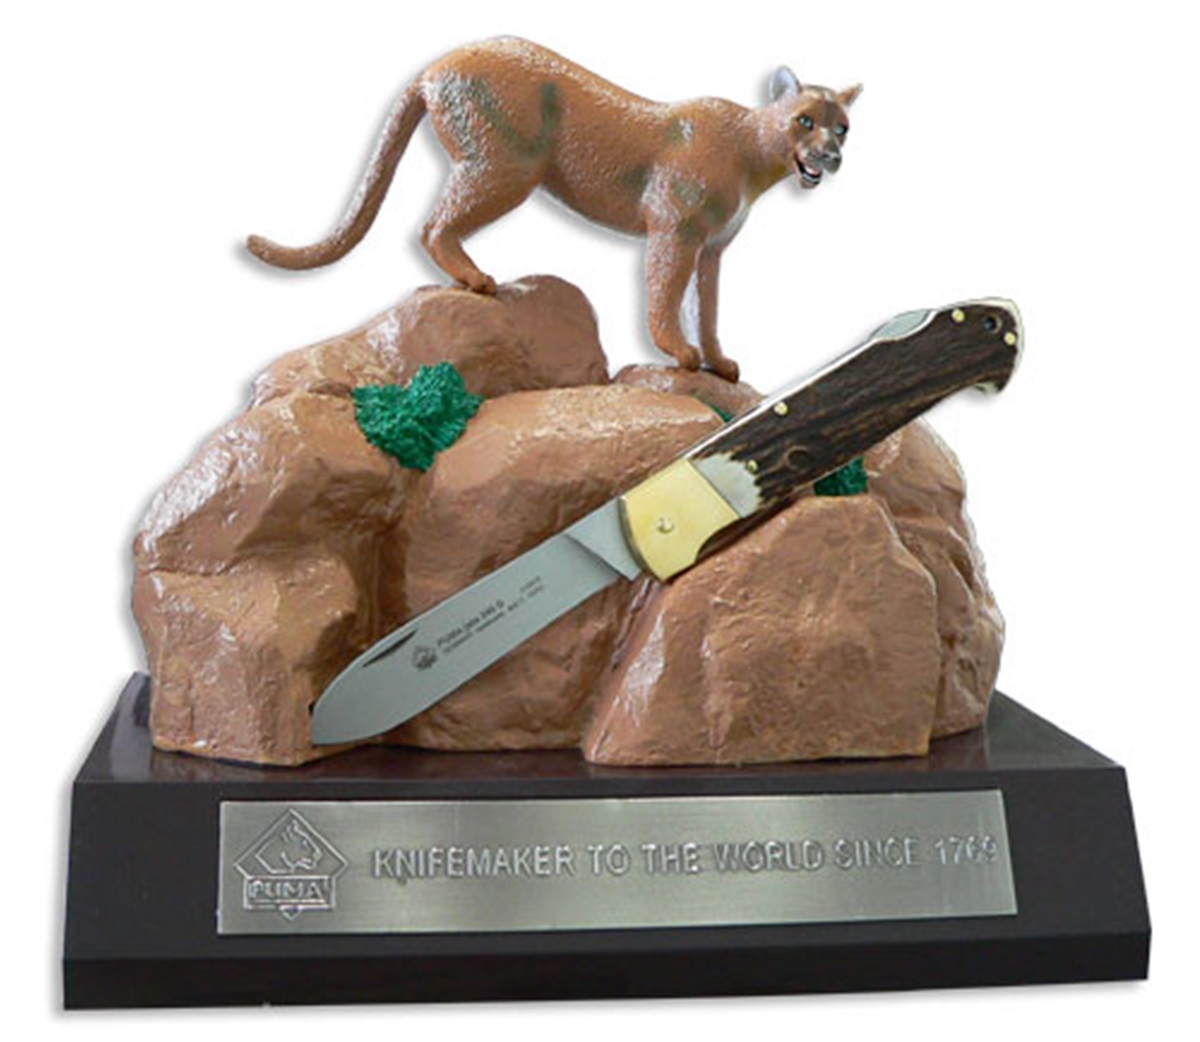 Puma Statue Knife Display - Special Order Please Allow 12 - 18 Weeks for Delivery